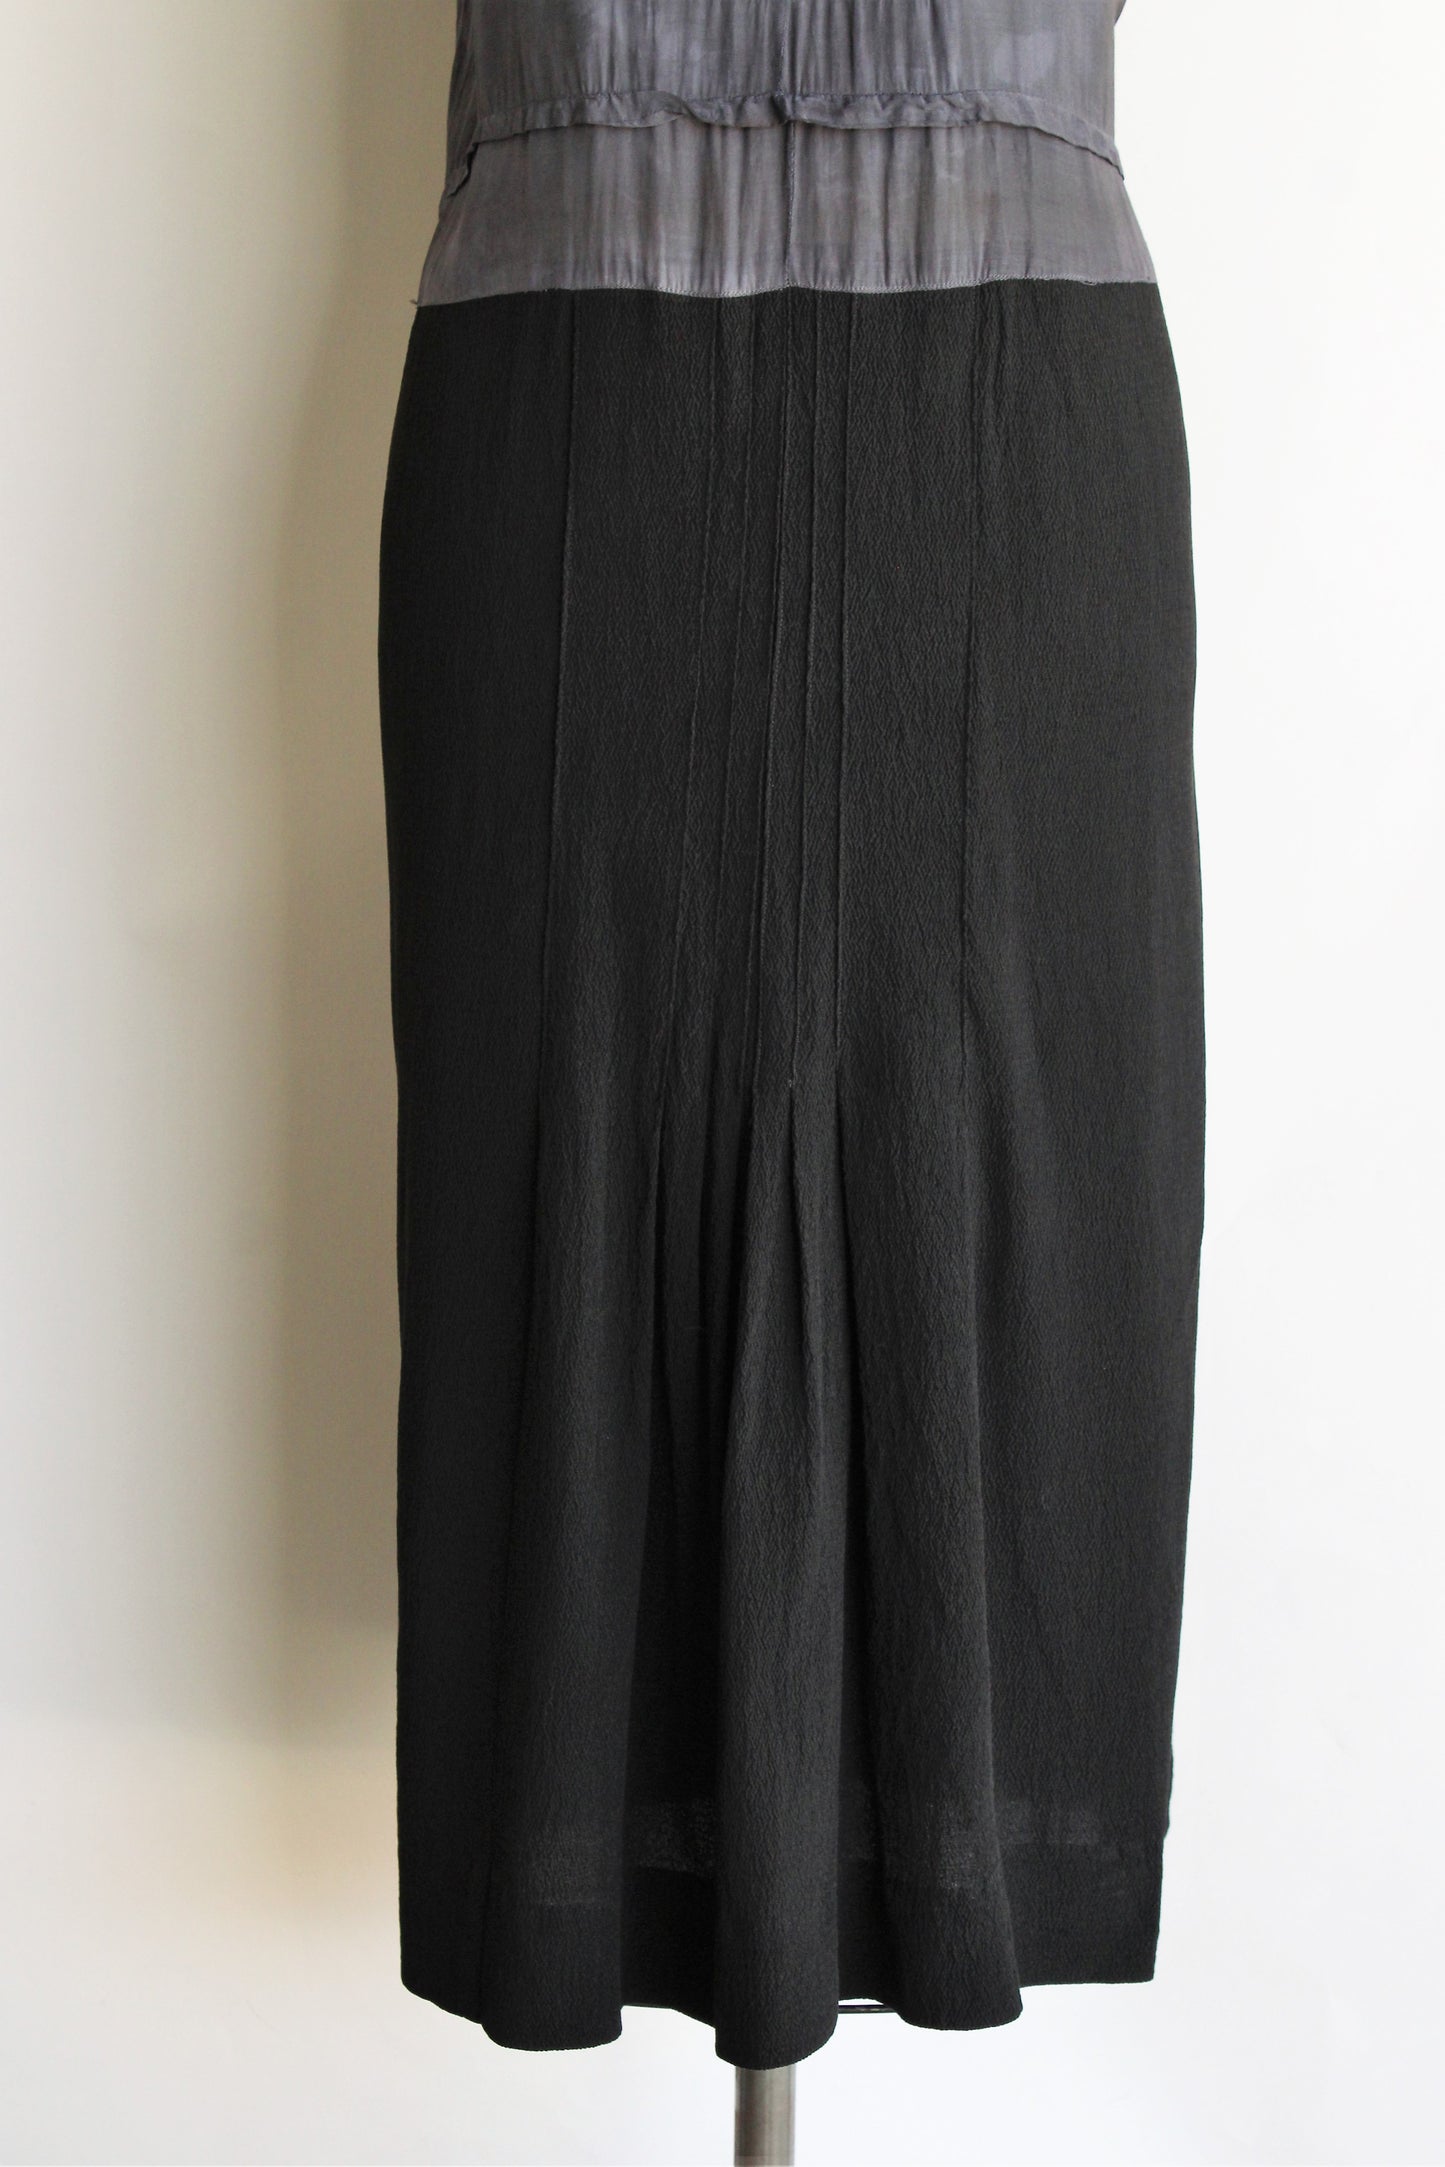 Vintage 1940s Black Rayon Dress with Criss Cross Bodice